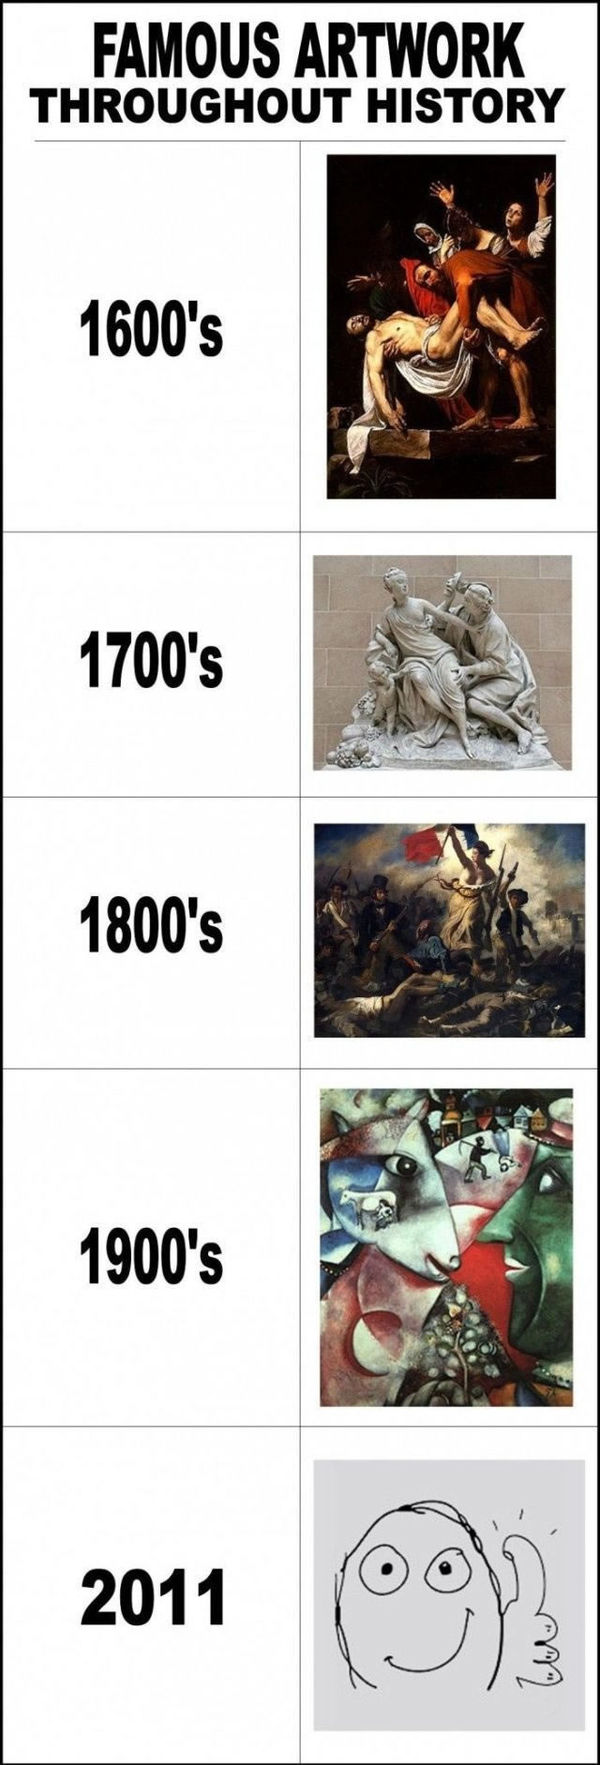 FAMOUS ARTWORK
 THROUGHOUT HISTORY
 1600's
 1700's
 1800's
 1900's
 2011